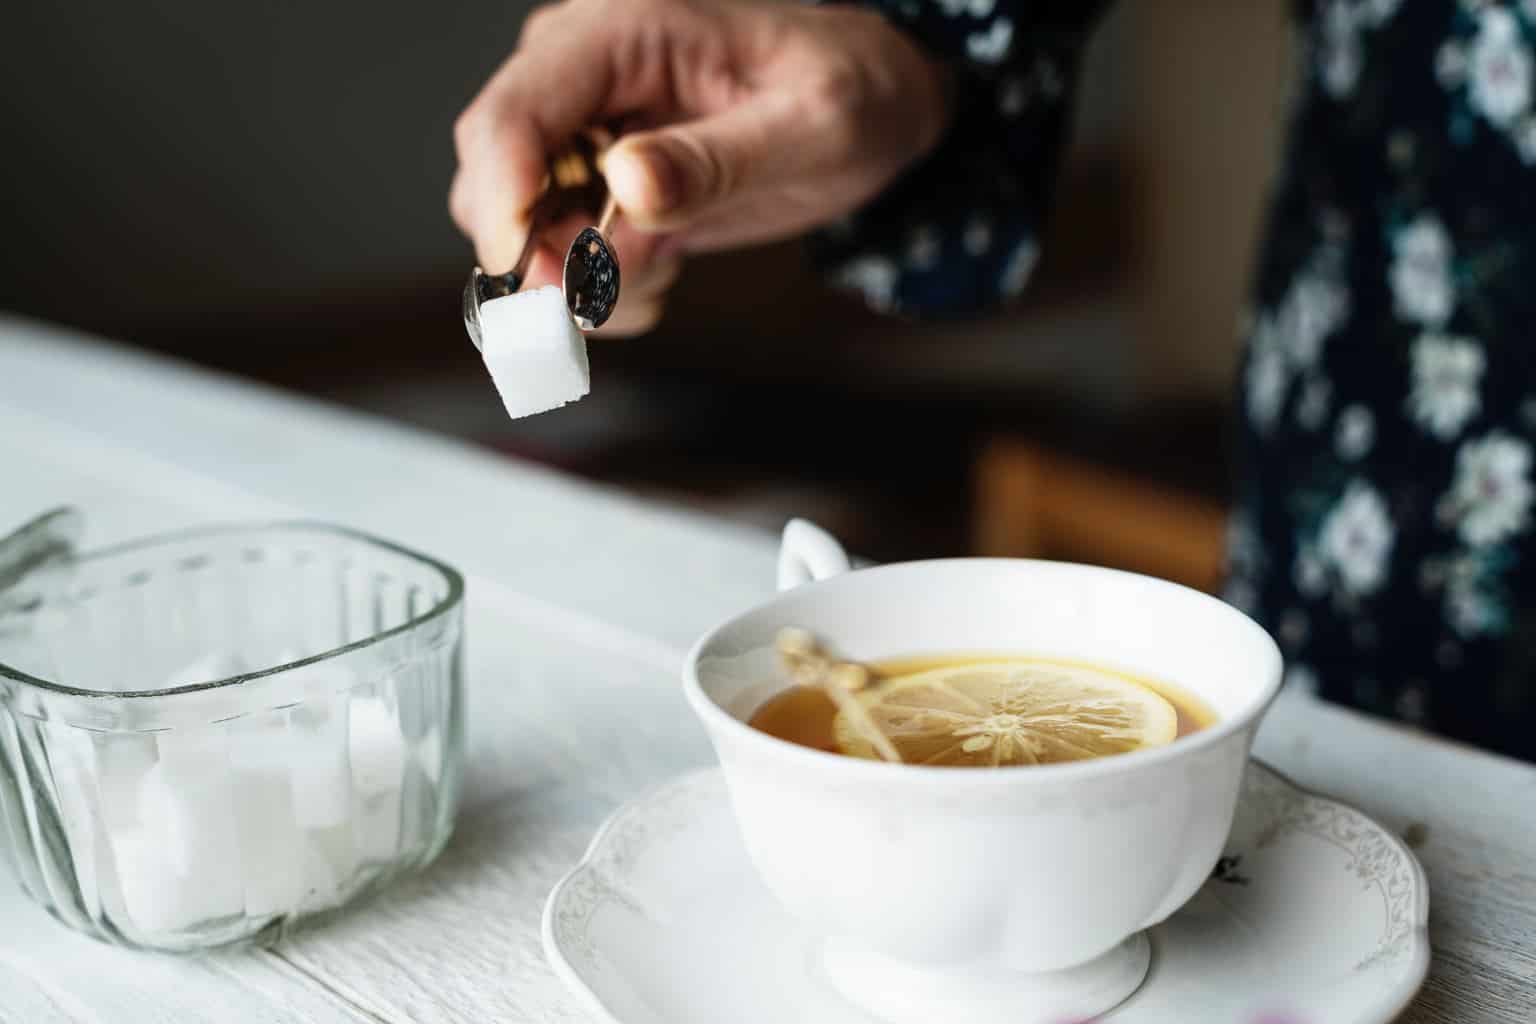 person transferring cube of sugar to teacup